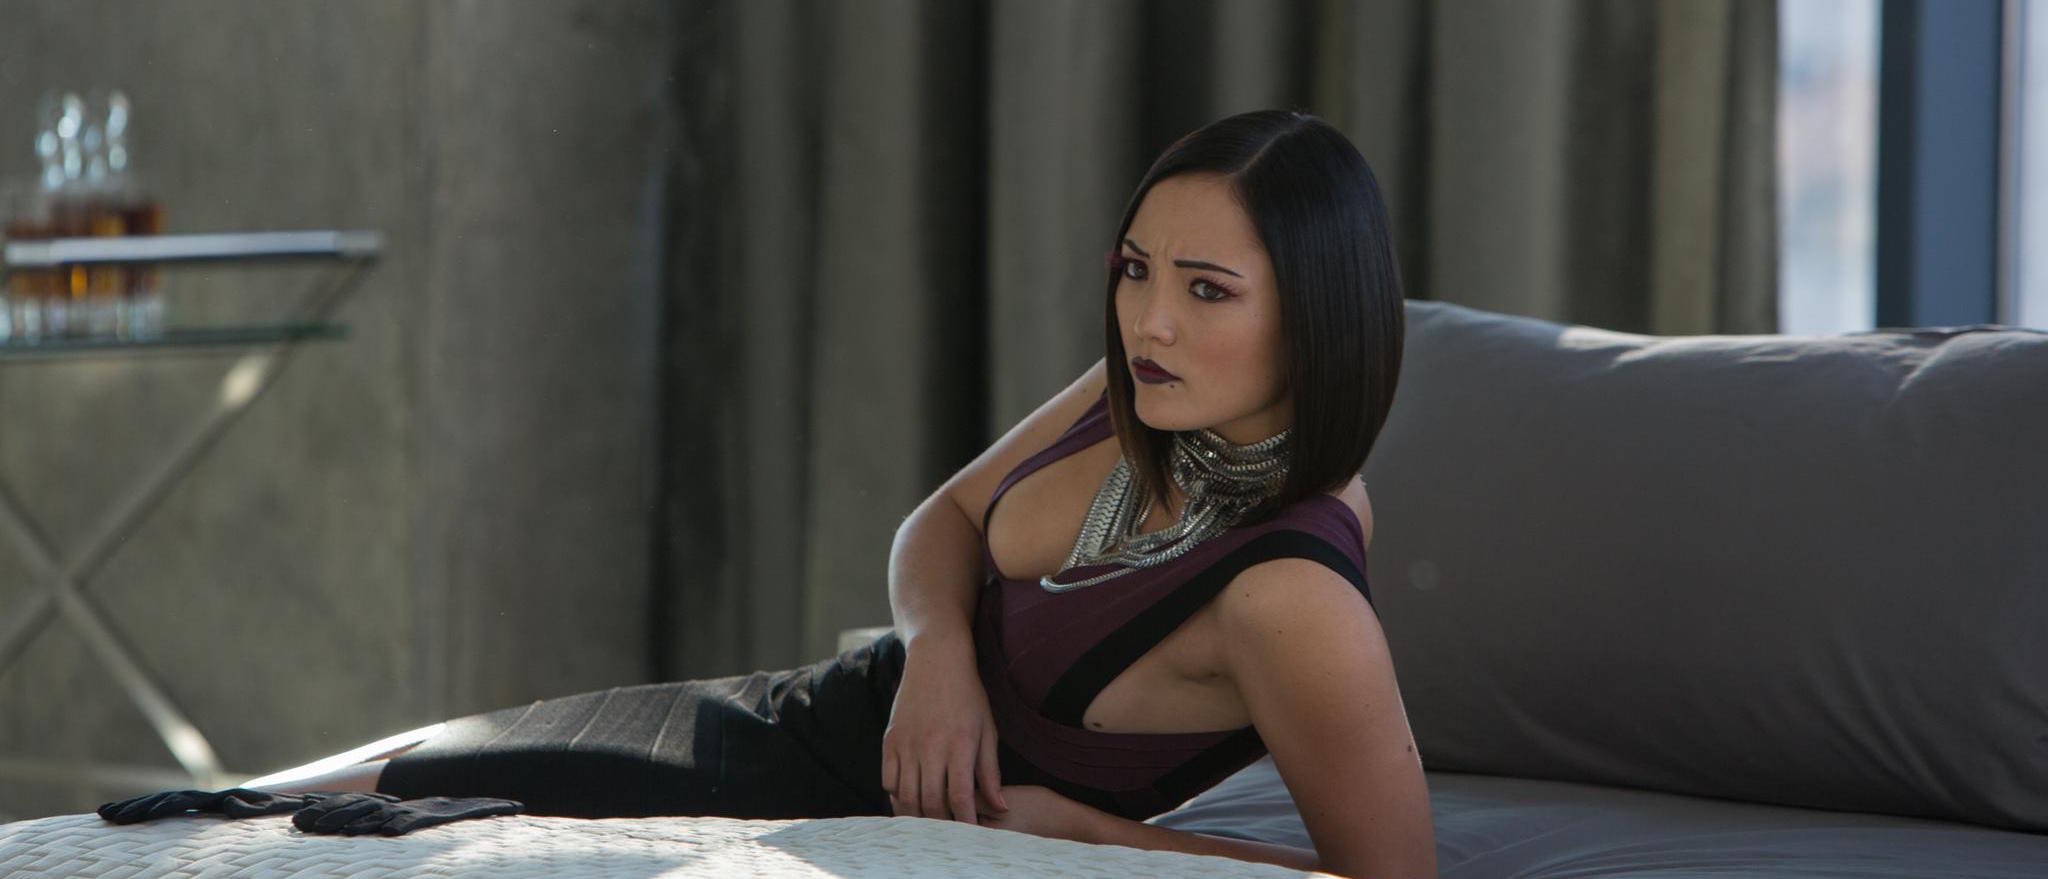 Guardians of the Galaxy Vol. 2 Adds Oldboy Actress2048 x 879